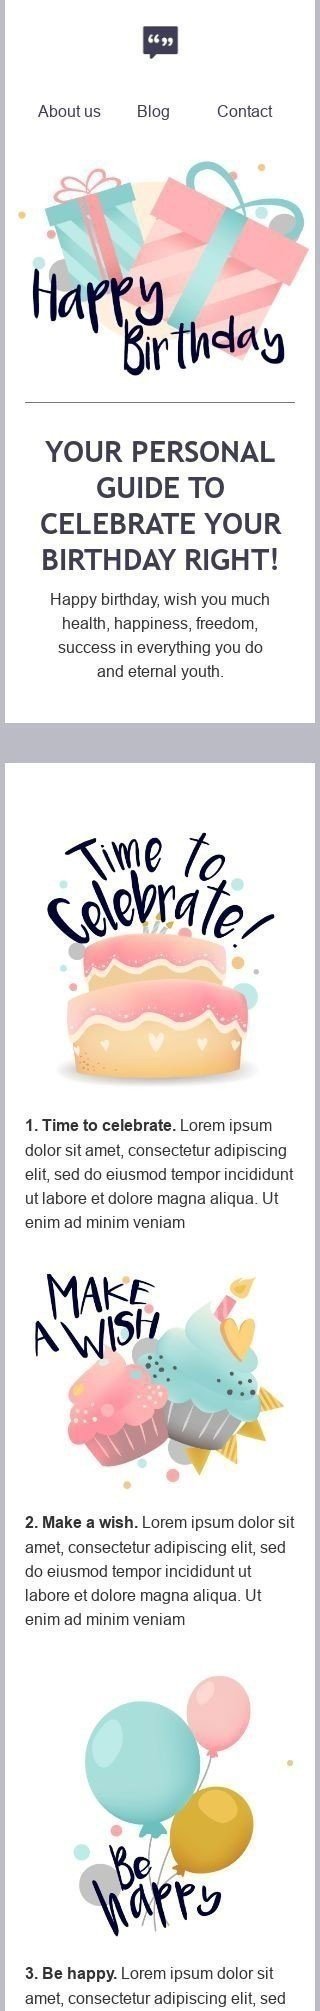 Birthday Email Template «Your holiday guide» for Publications & Blogging industry mobile view